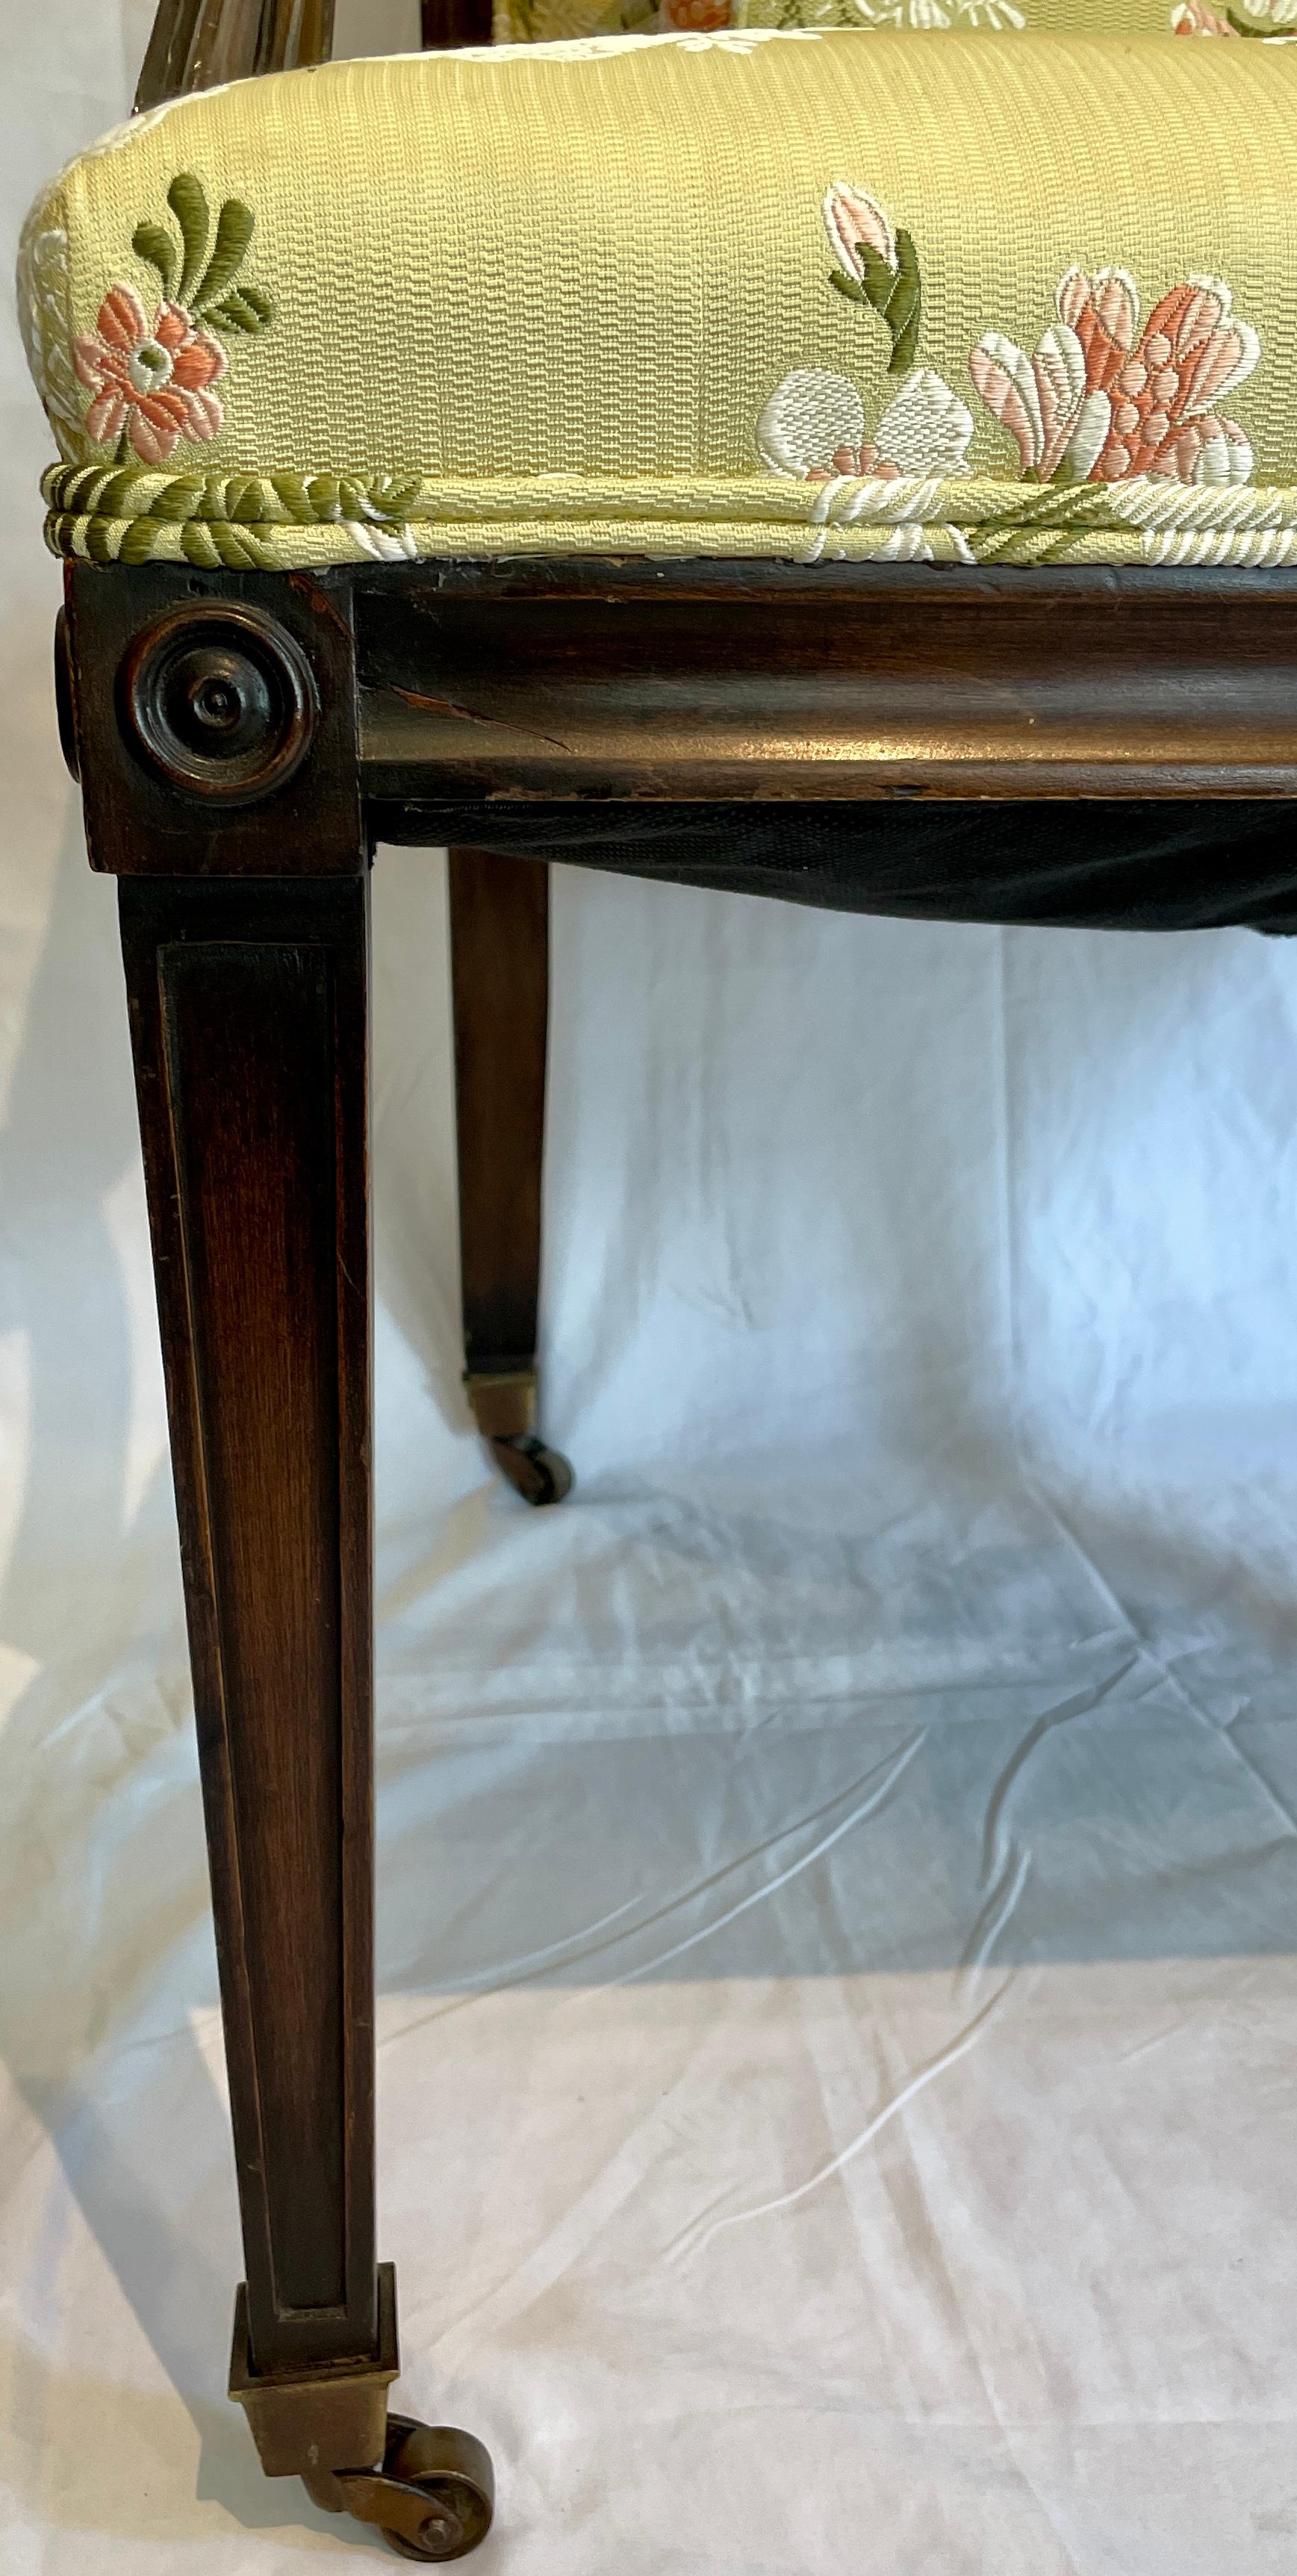 Antique English Mahogany Desk Chair with Scalamandre Fabric, Circa 1850-1860 For Sale 3